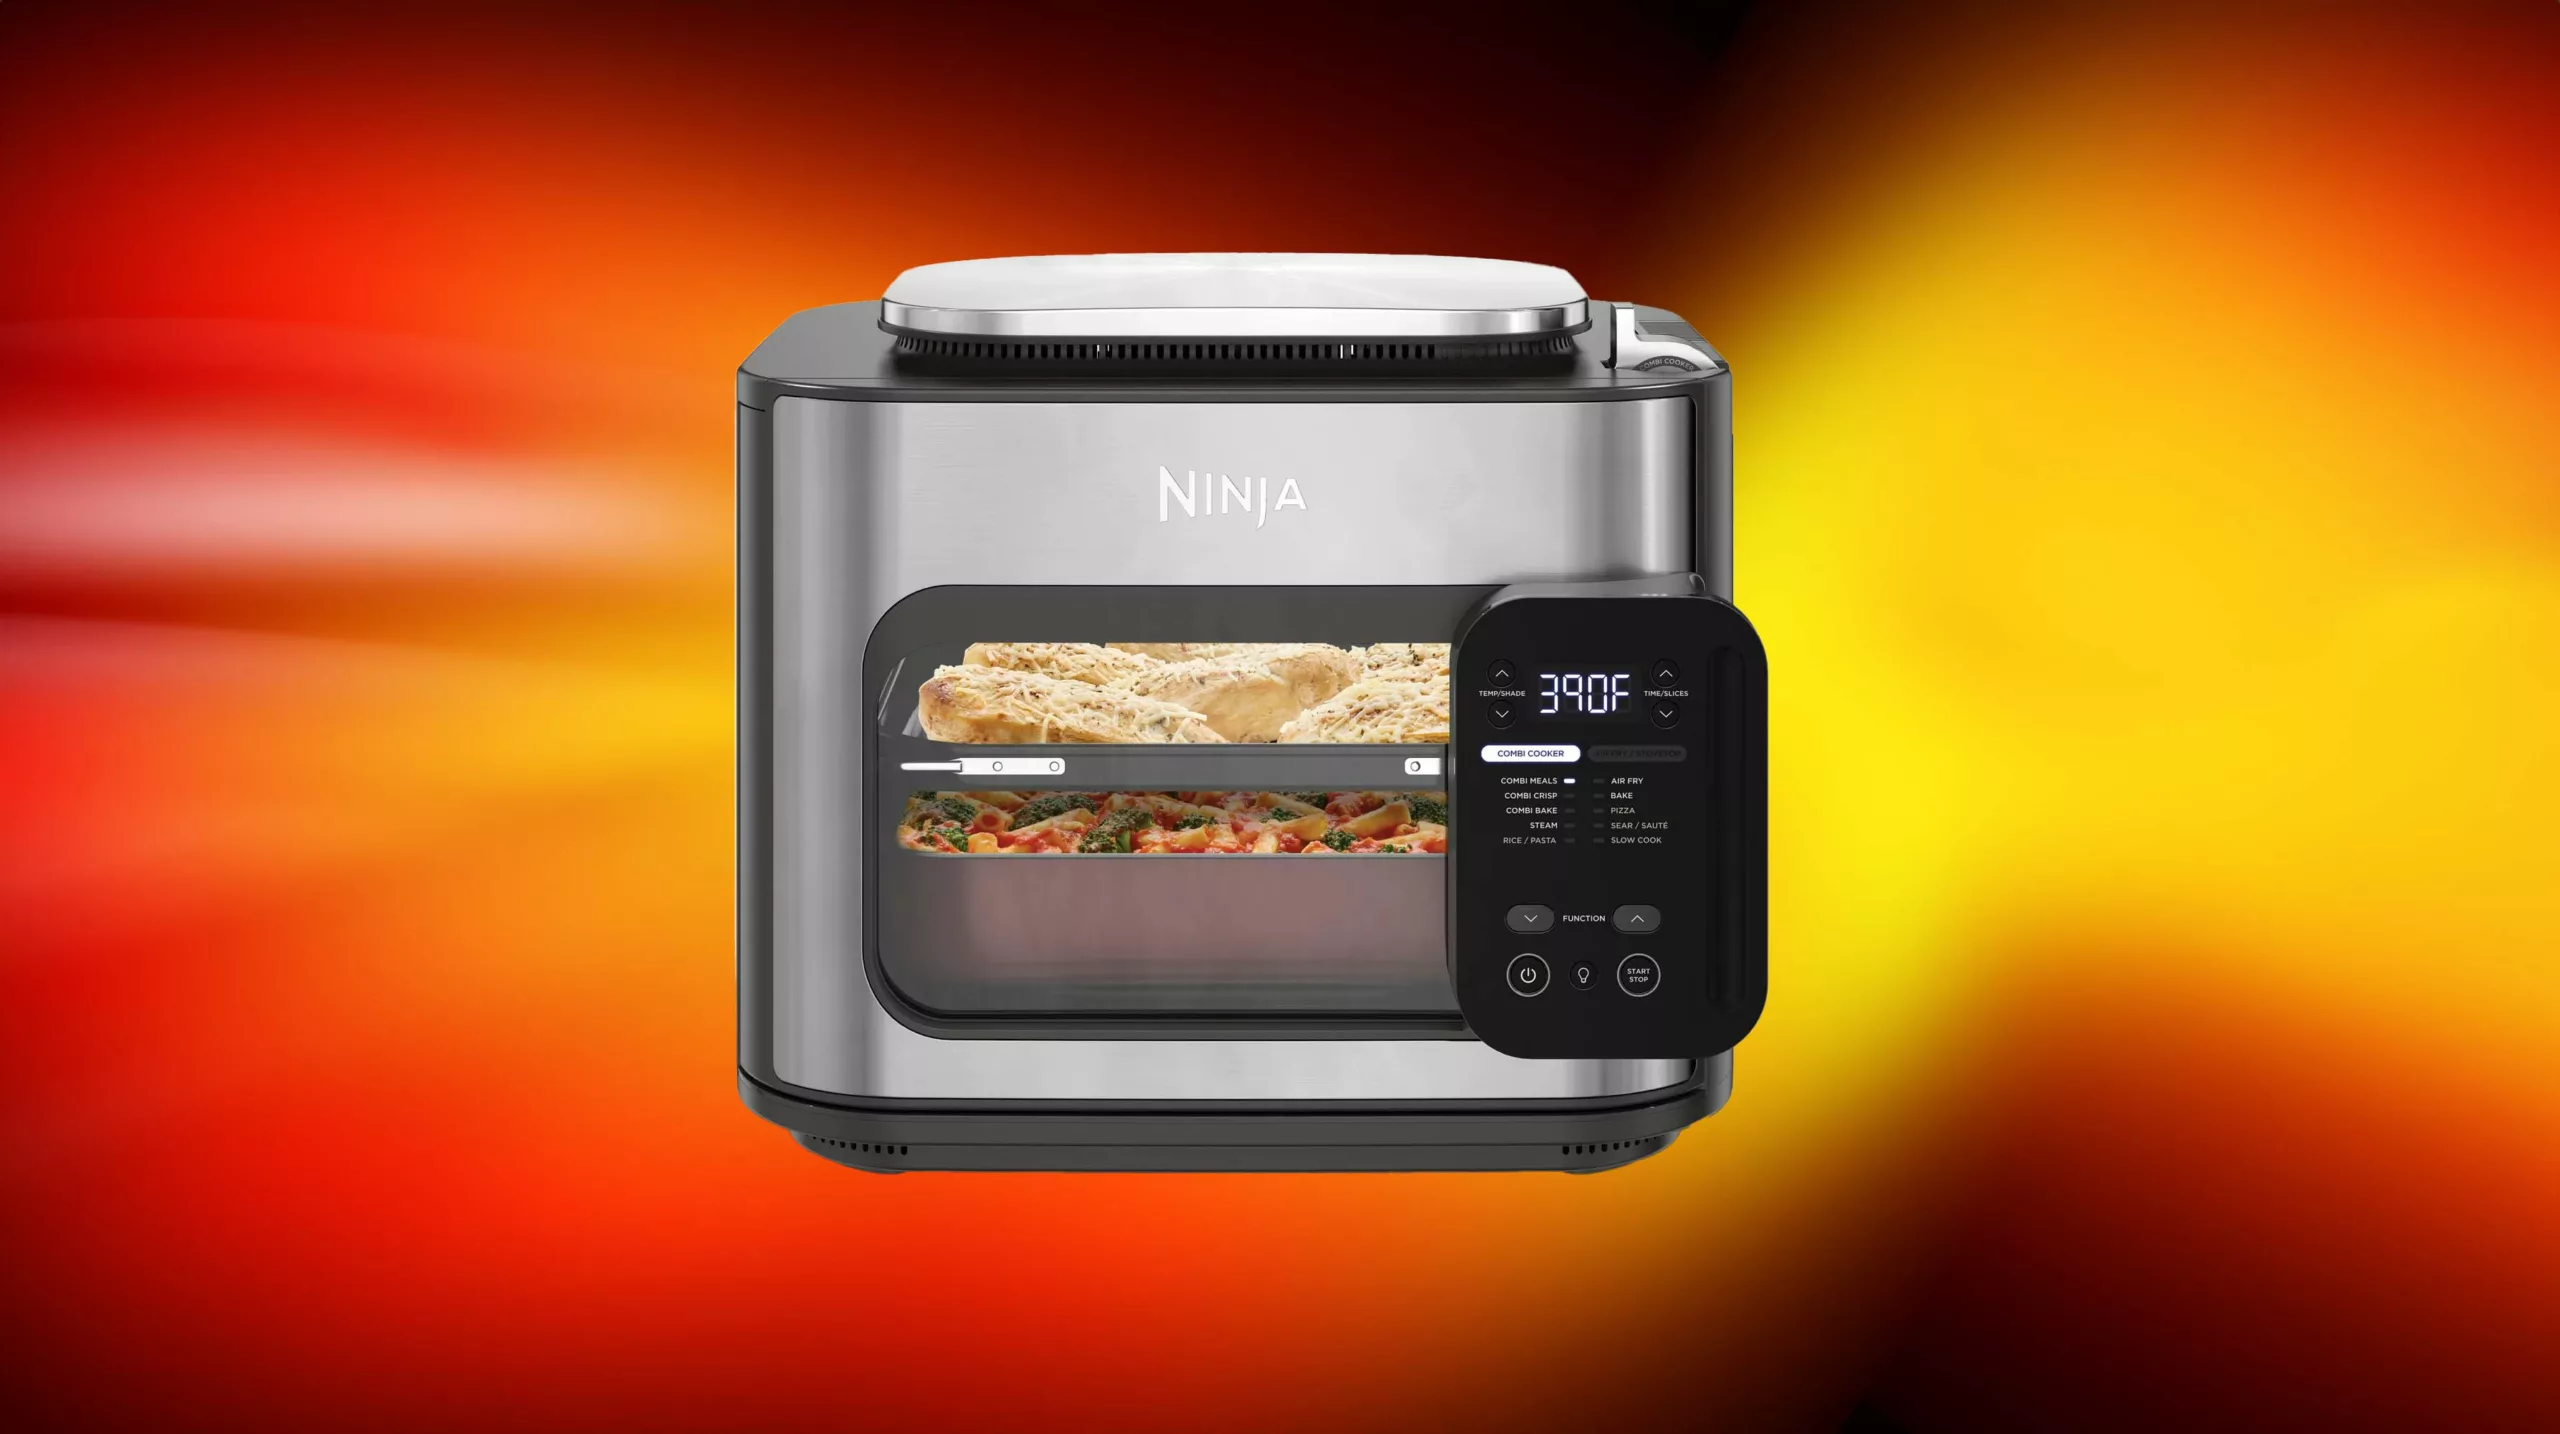 Multi Cookers  Getting Started with the Ninja Combi™ 